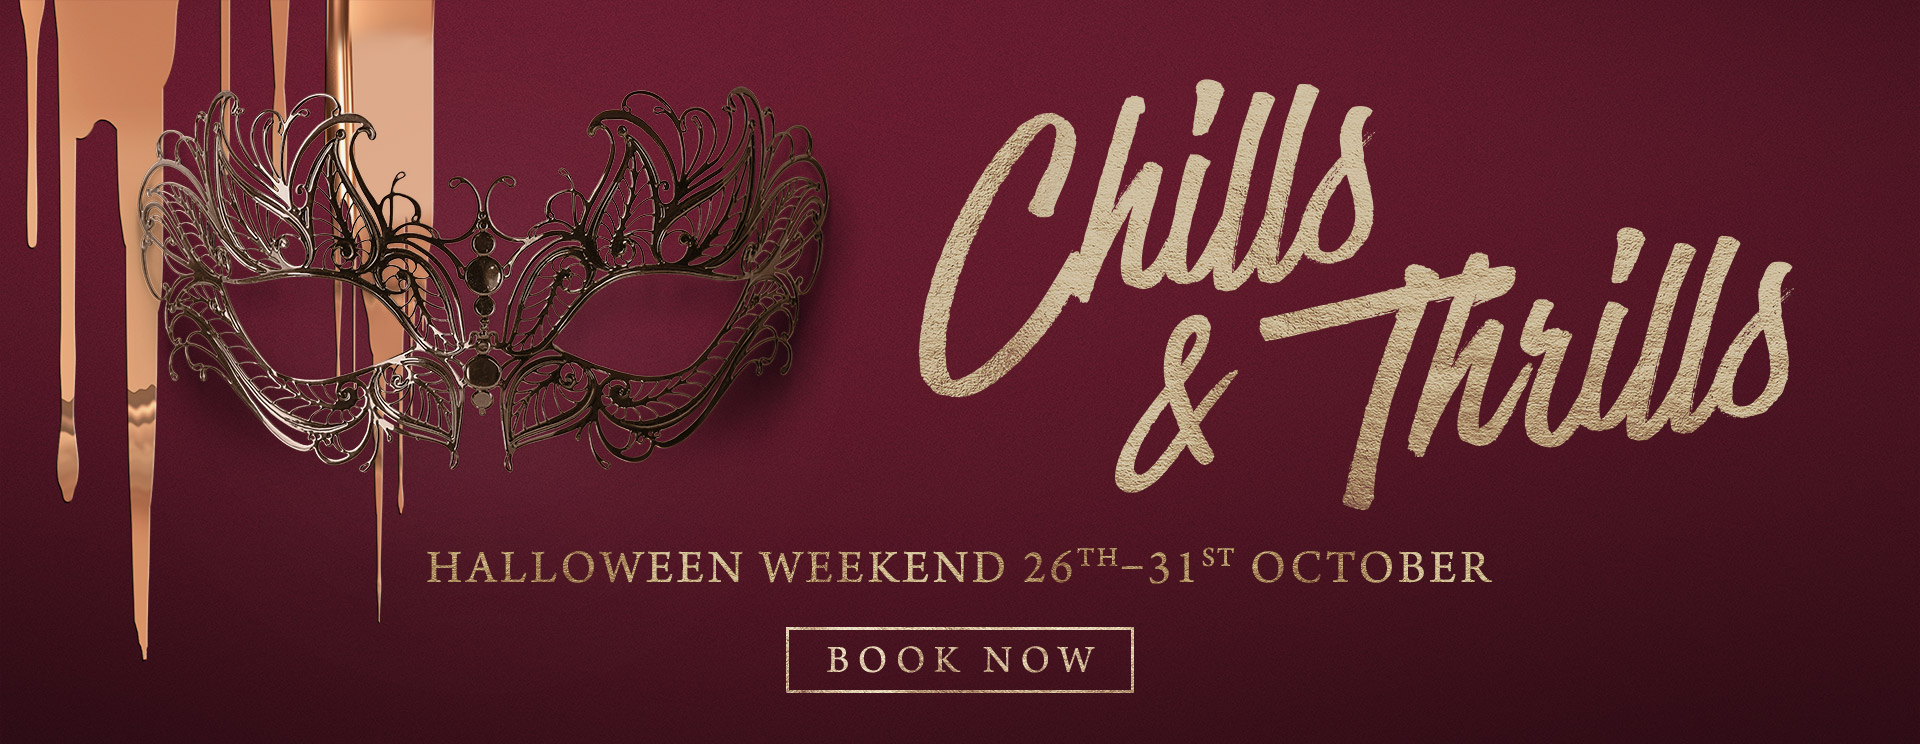 Chills & Thrills this Halloween at The Wavendon Arms